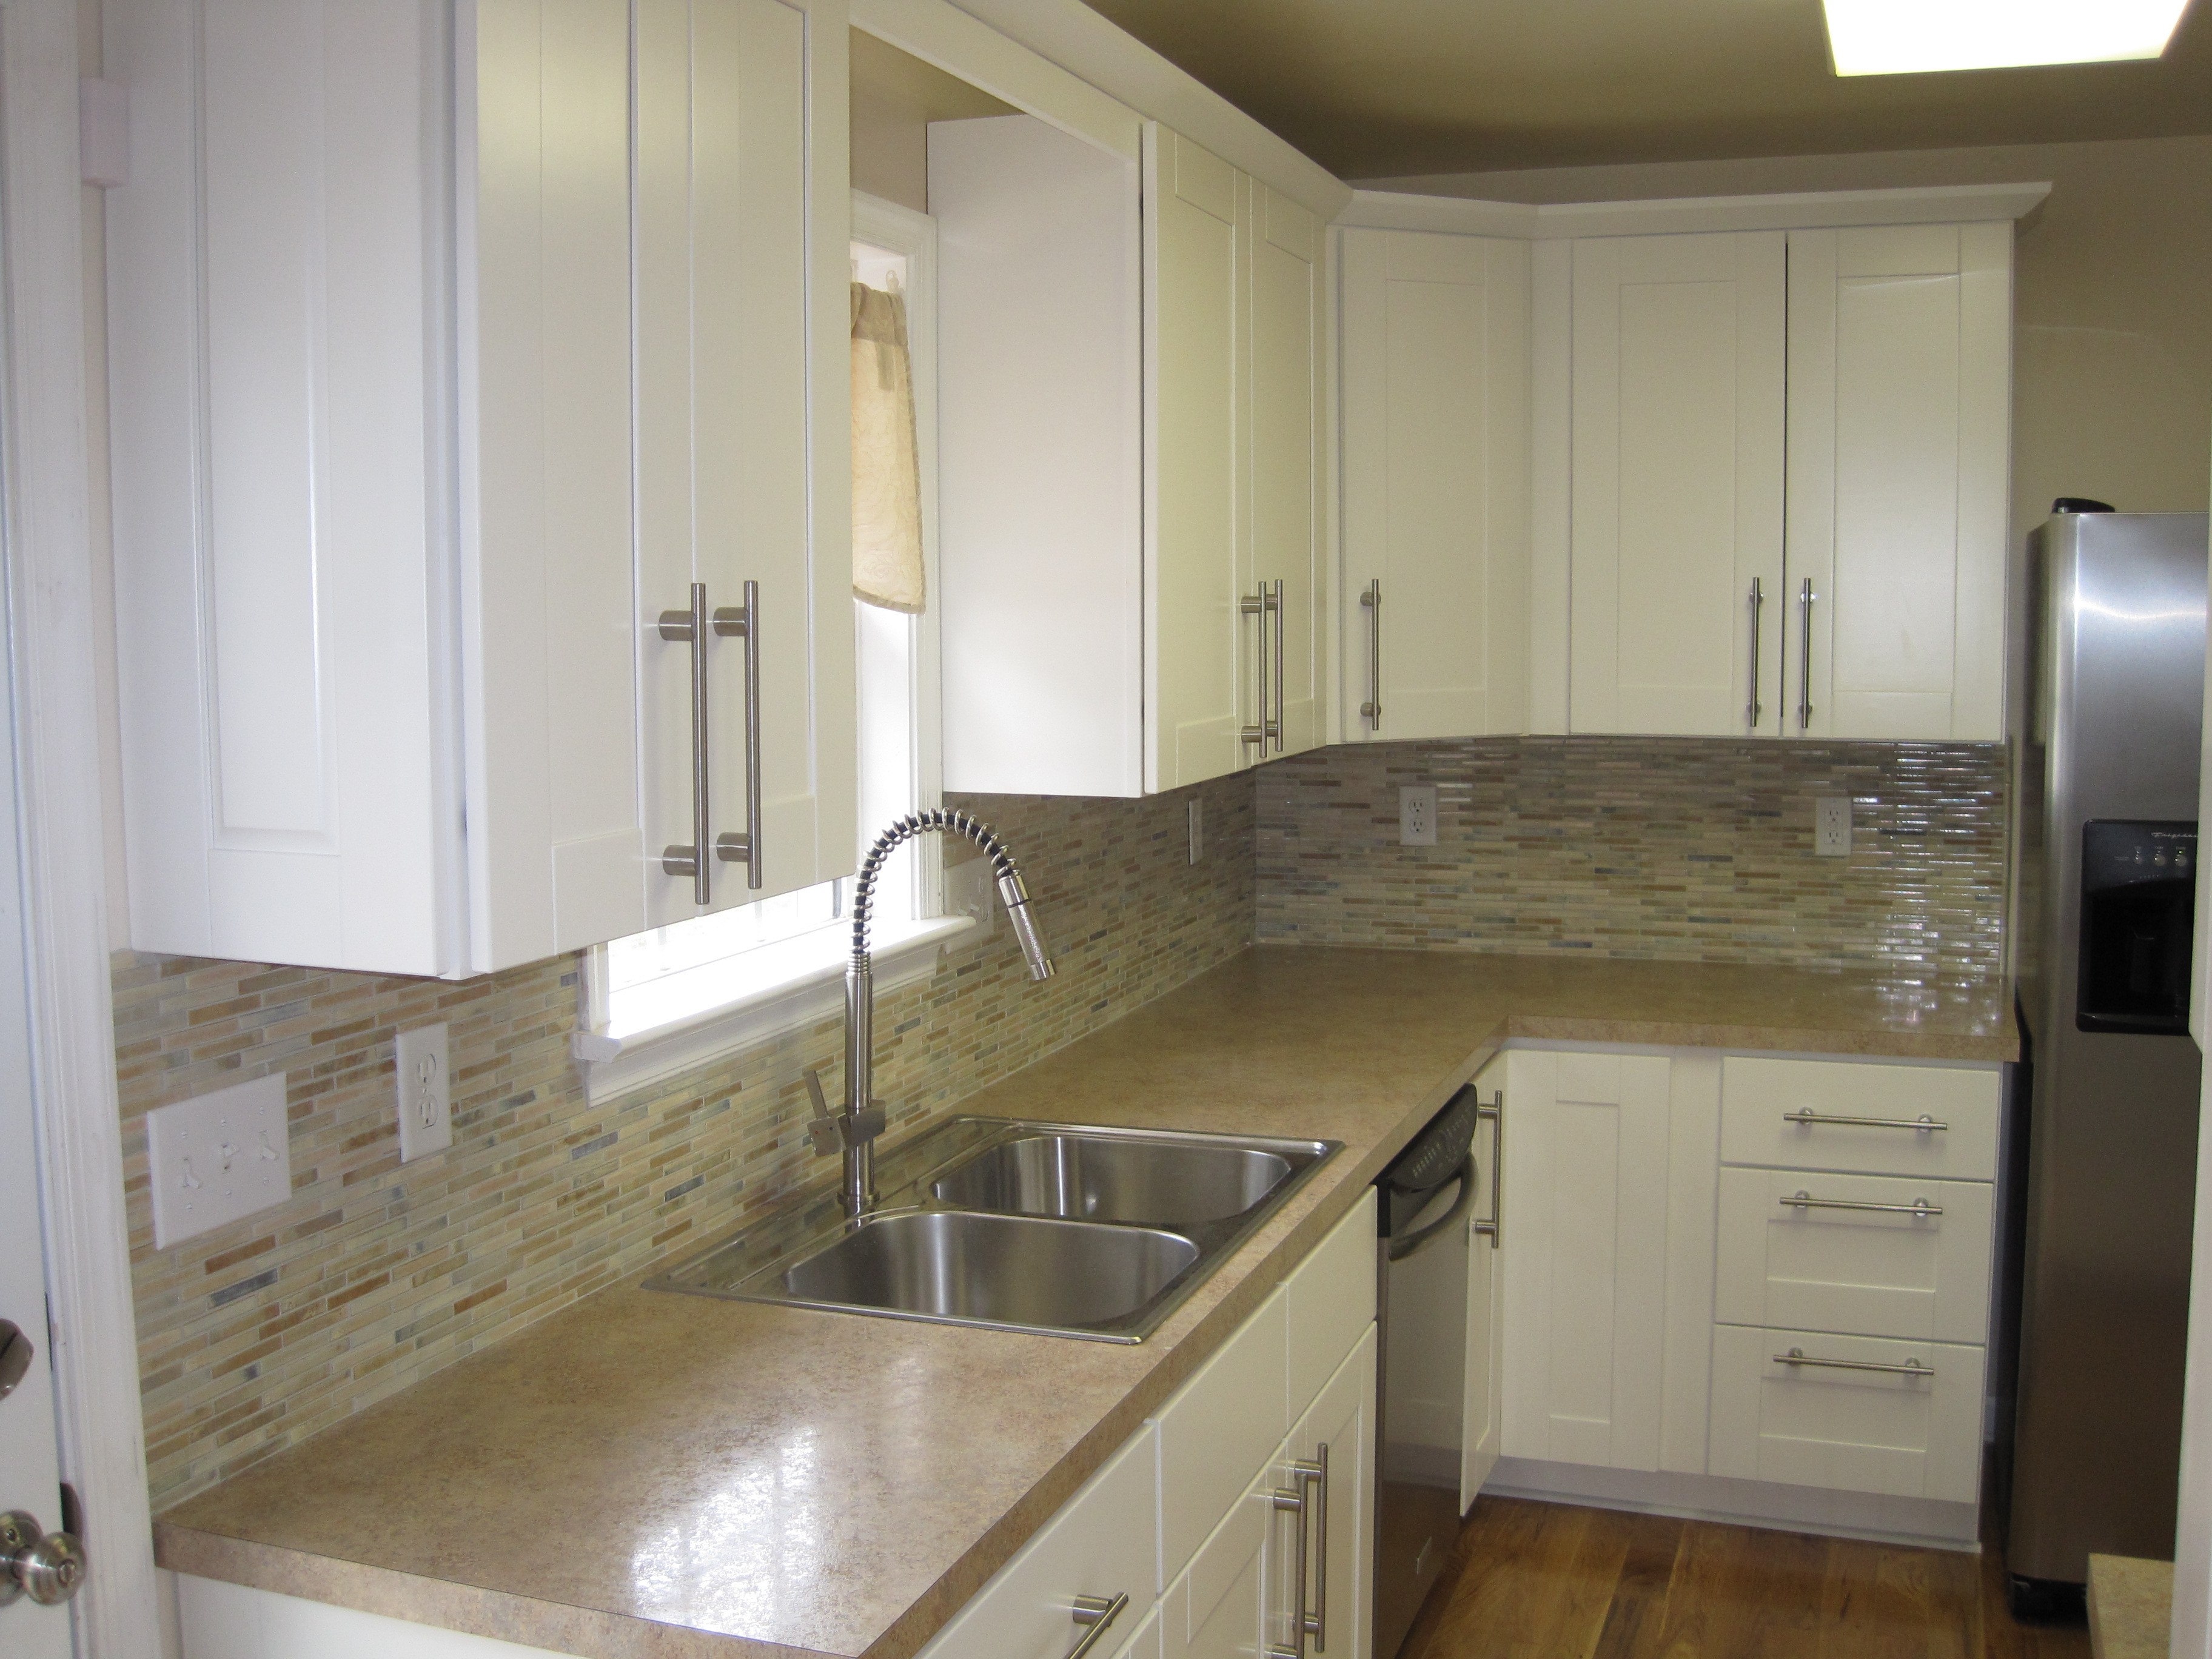 Average Cost Of Small Kitchen Remodel
 Galley Kitchen Remodel Estimator – Wow Blog